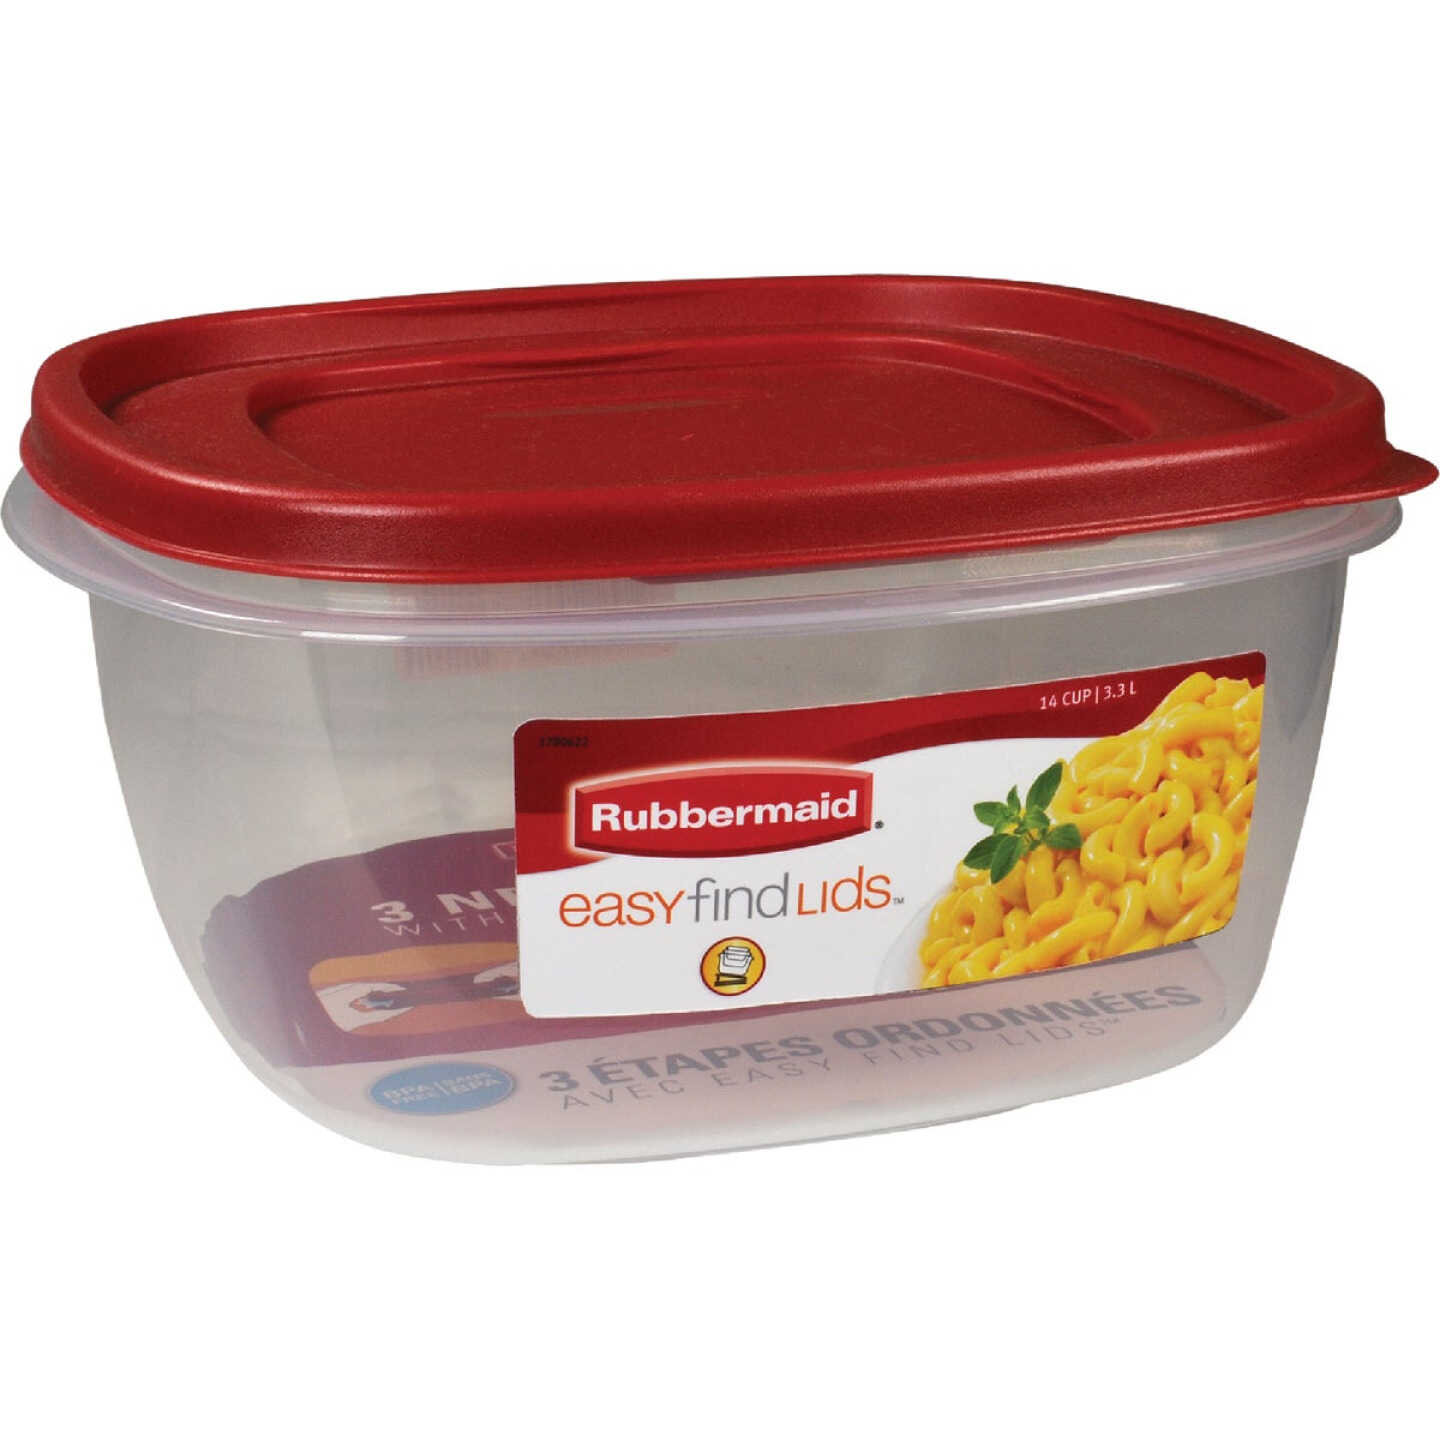 Rubbermaid Easy Find Lids Container & Lid Extra Clear 3 Cup